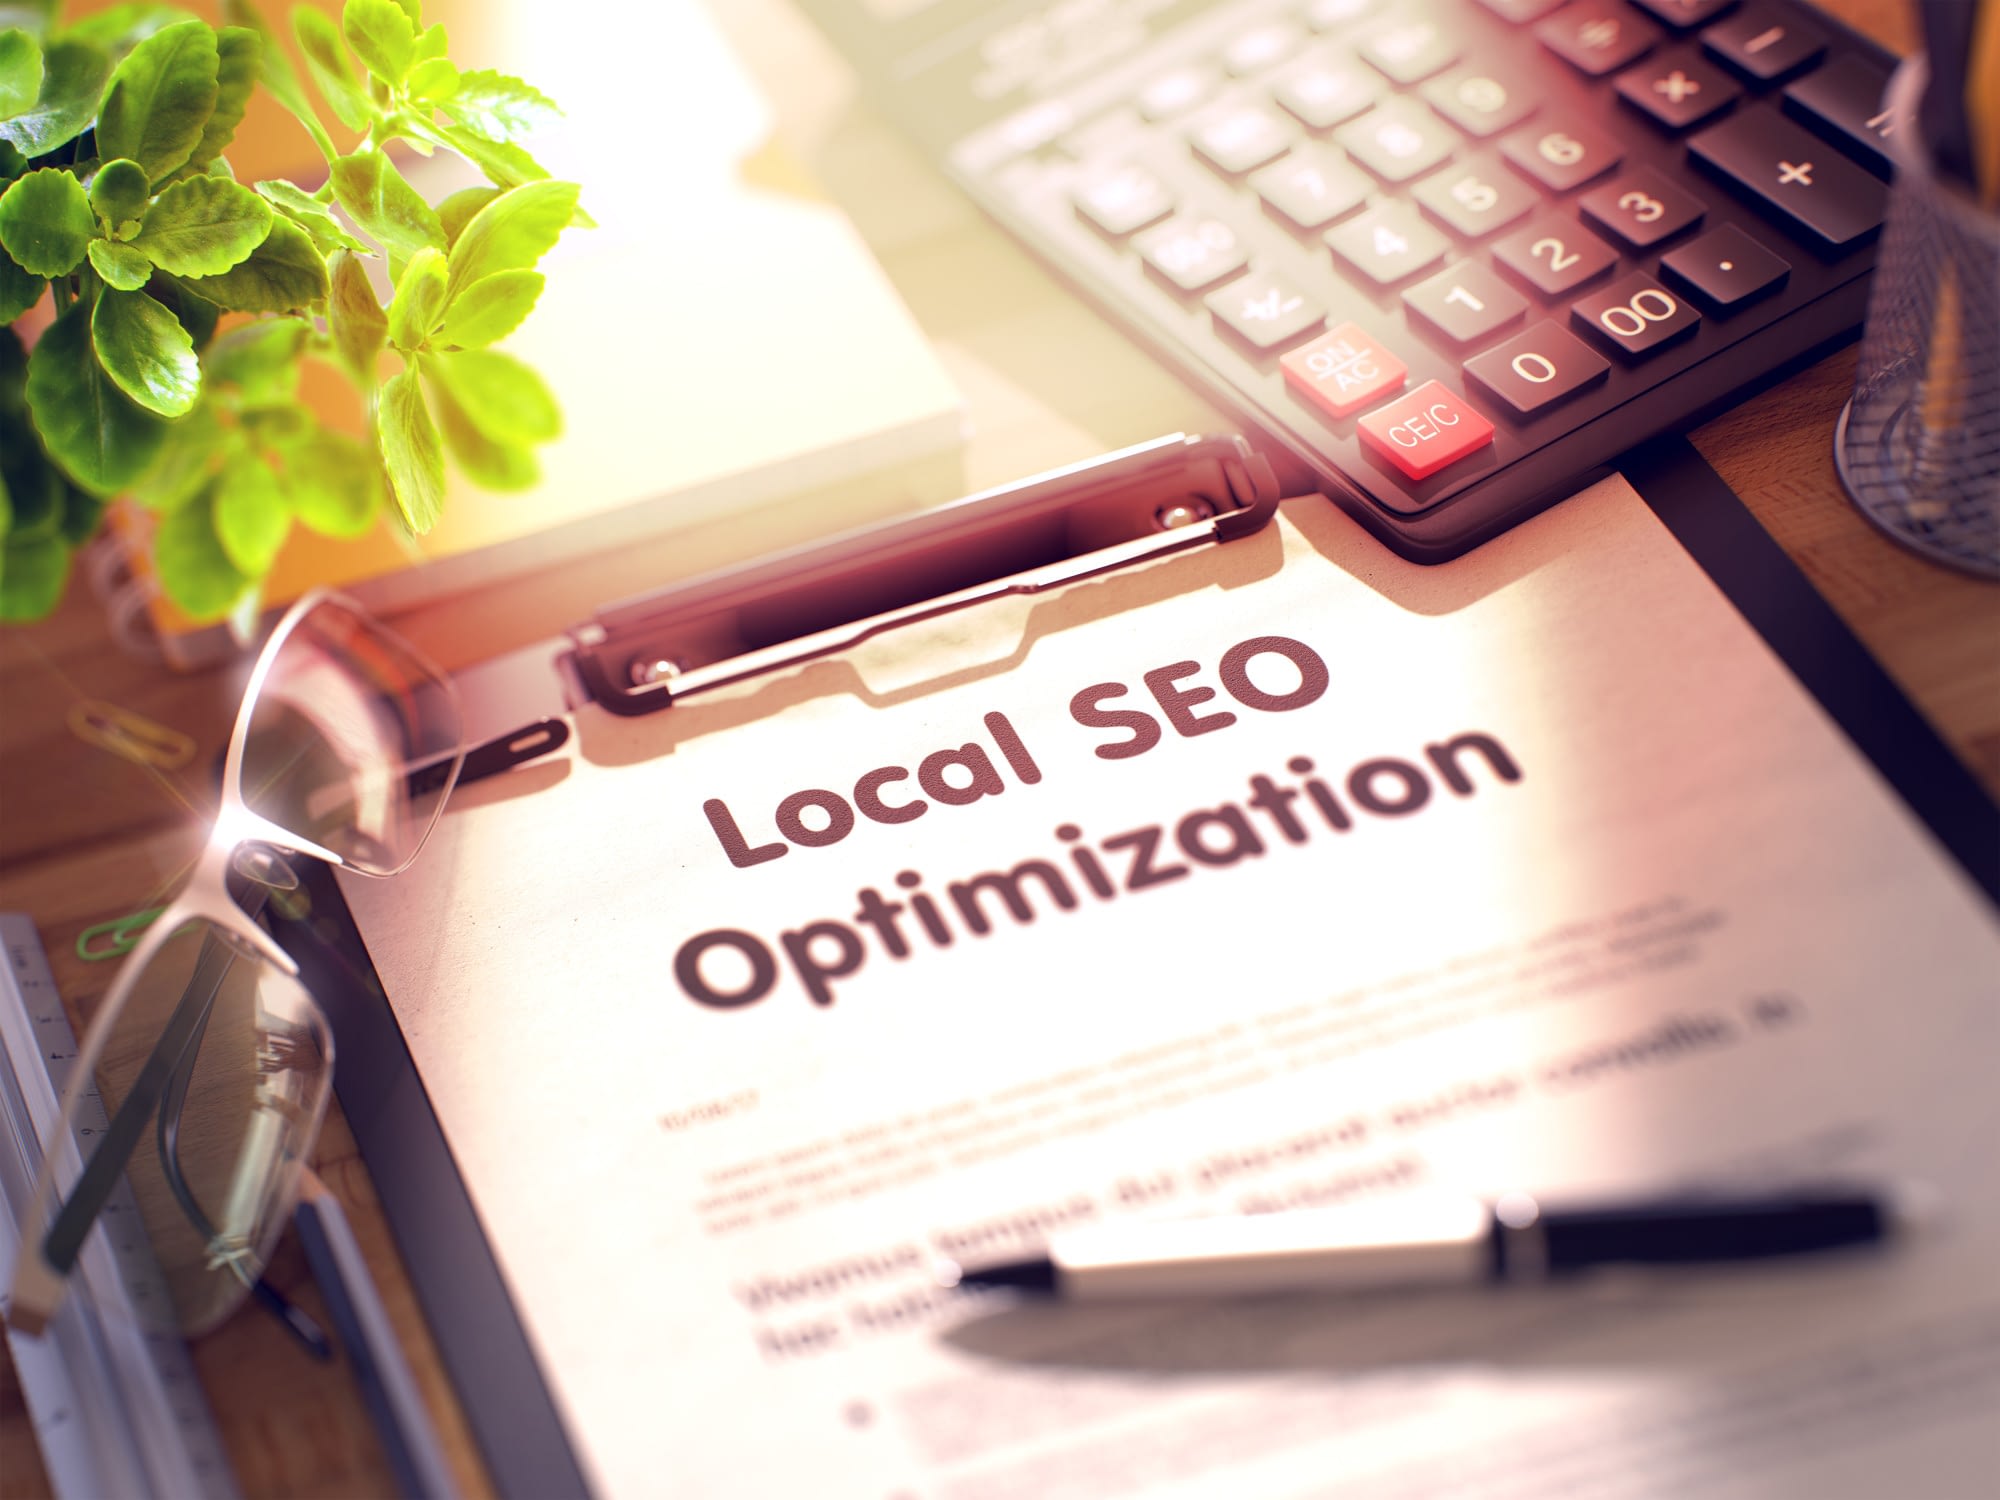 When it comes to optimizing your website to increase local search ranking, explore these important tips for local SEO for multiple locations.